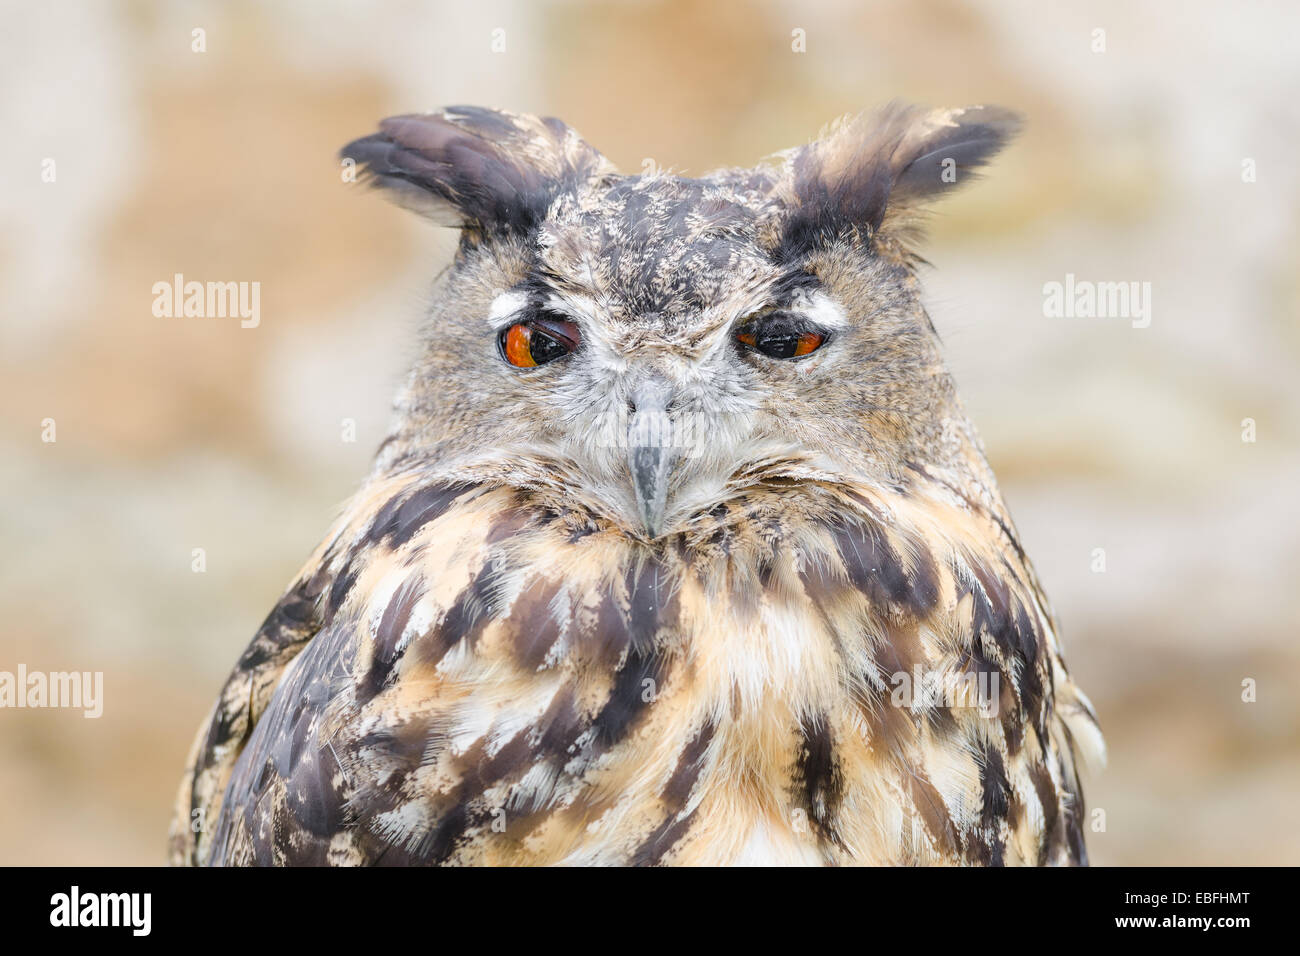 Horned owl or bubo bird close-up portrait of silent night hunter against blurred background Stock Photo